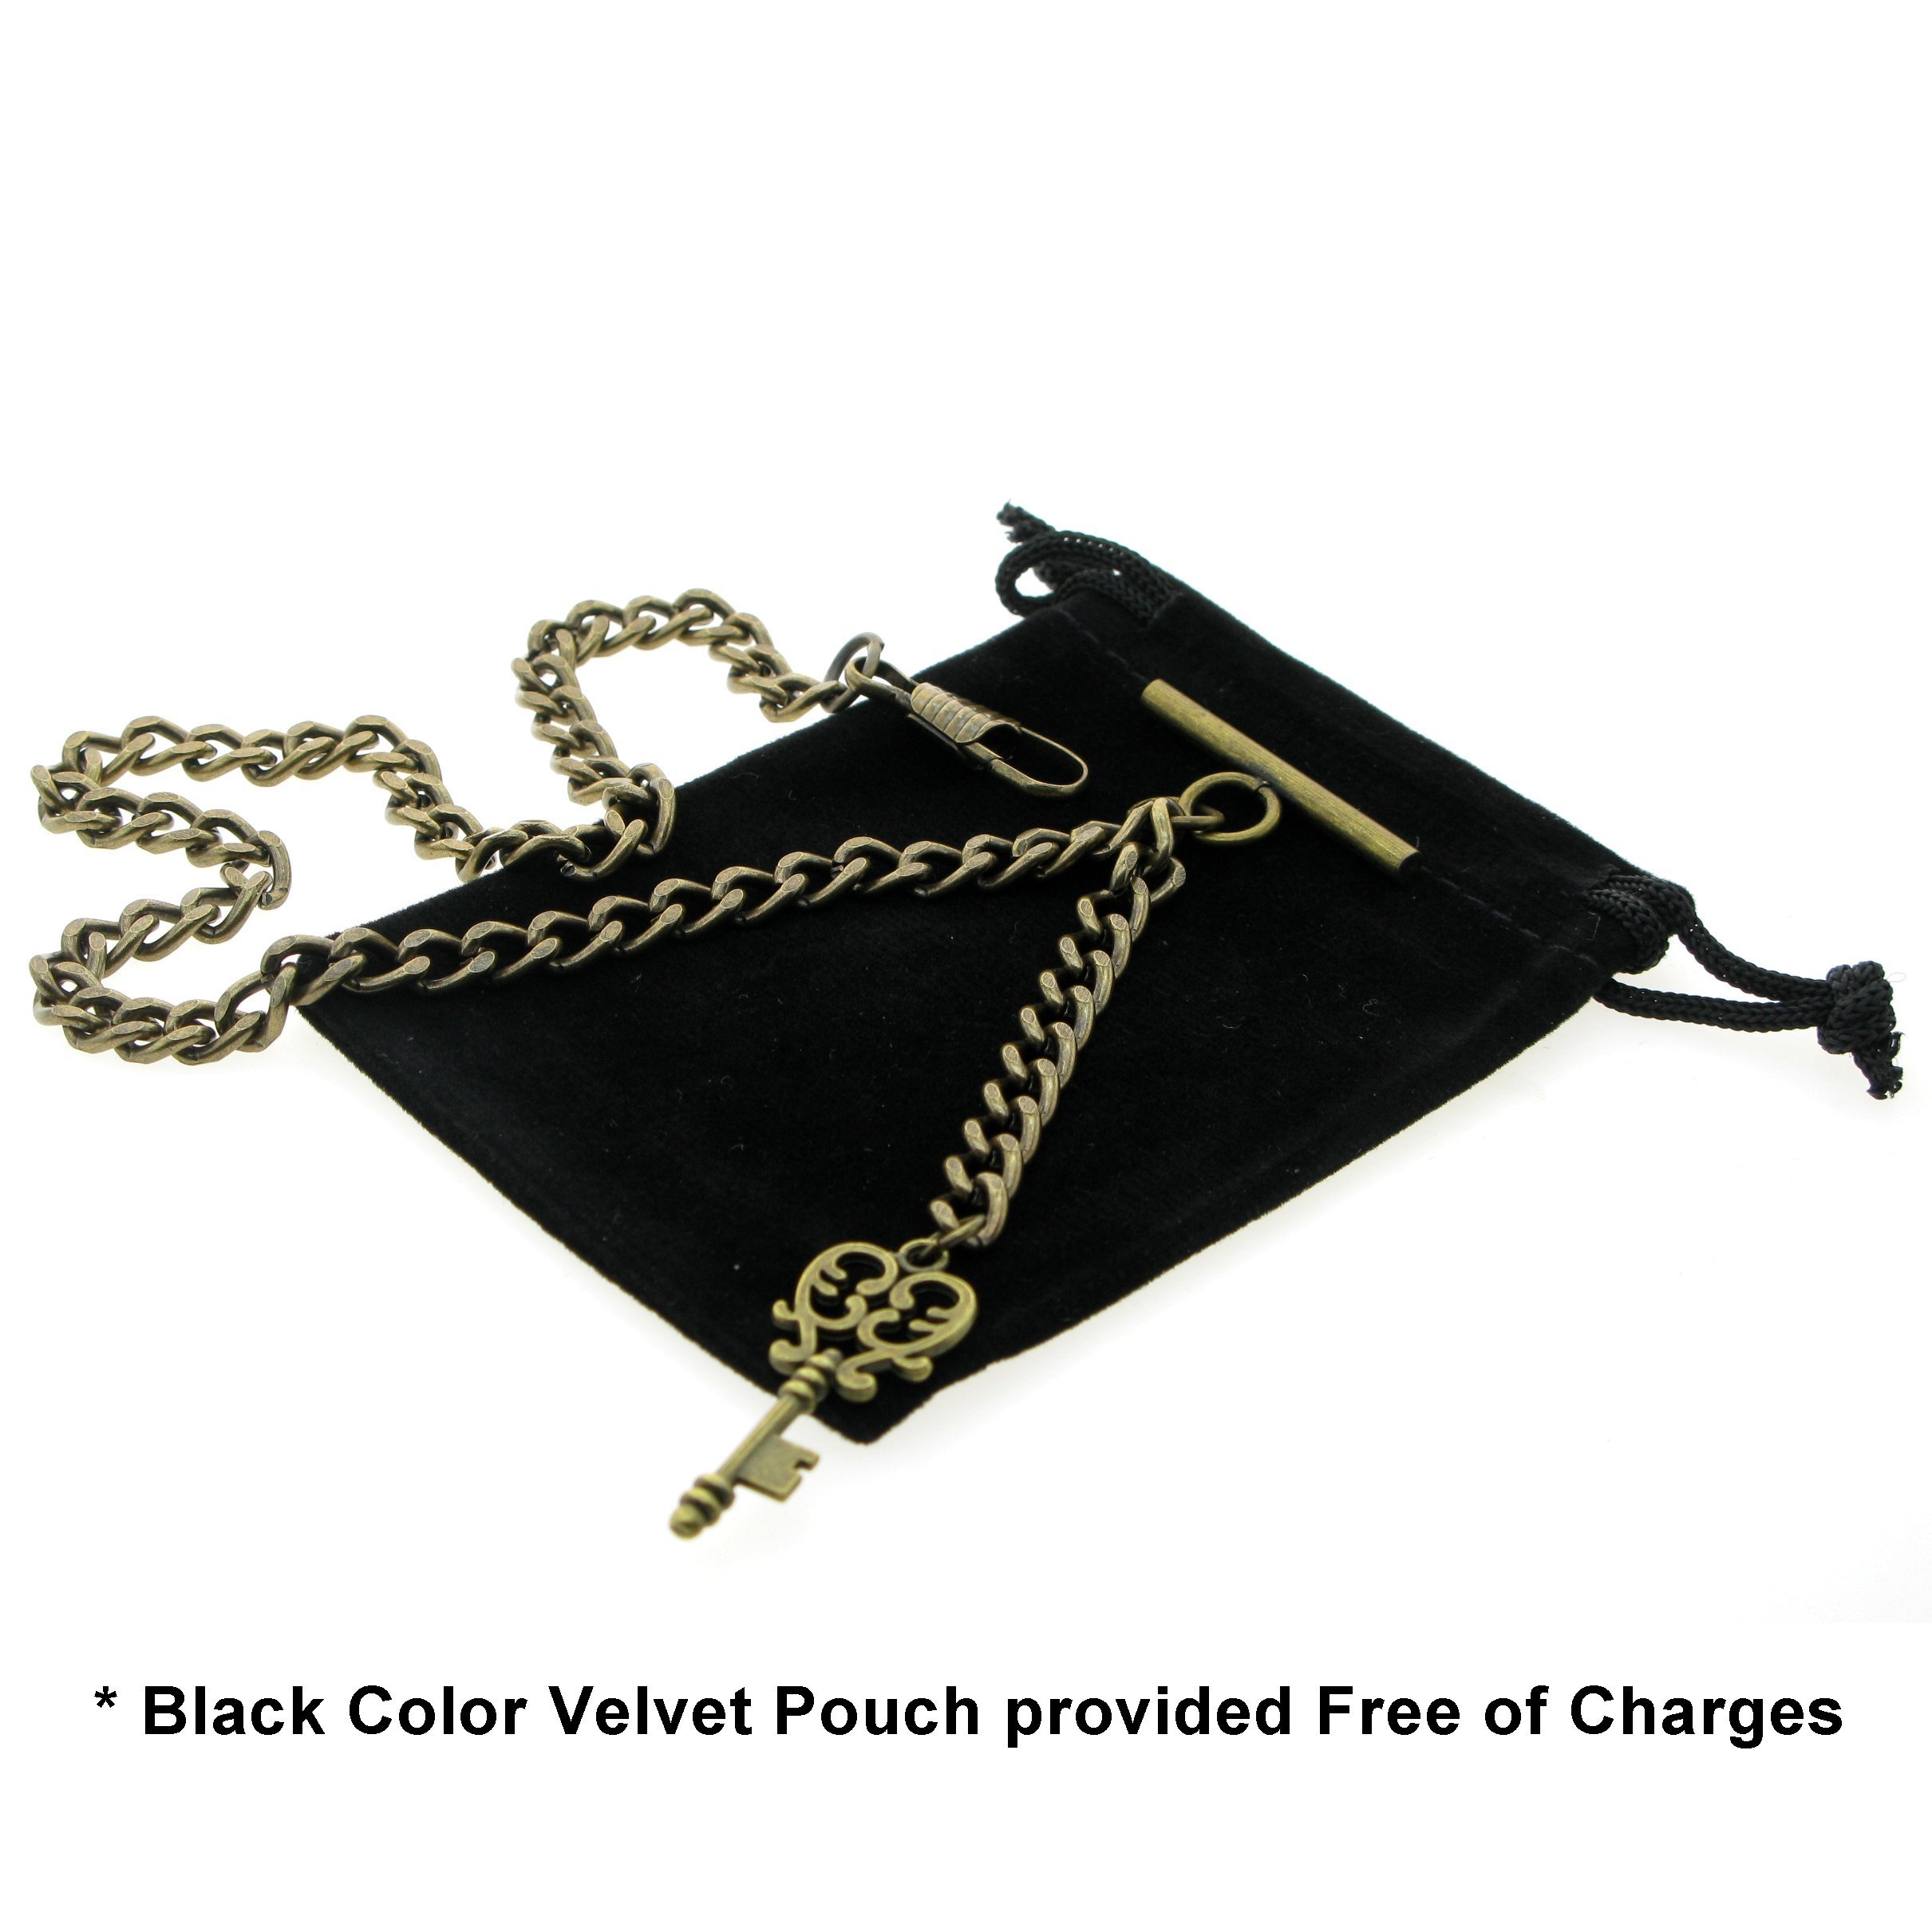 Albert Chain Pocket Watch Chains for Men Antique Brass Plating with Antique Key Design Fob T Bar AC15